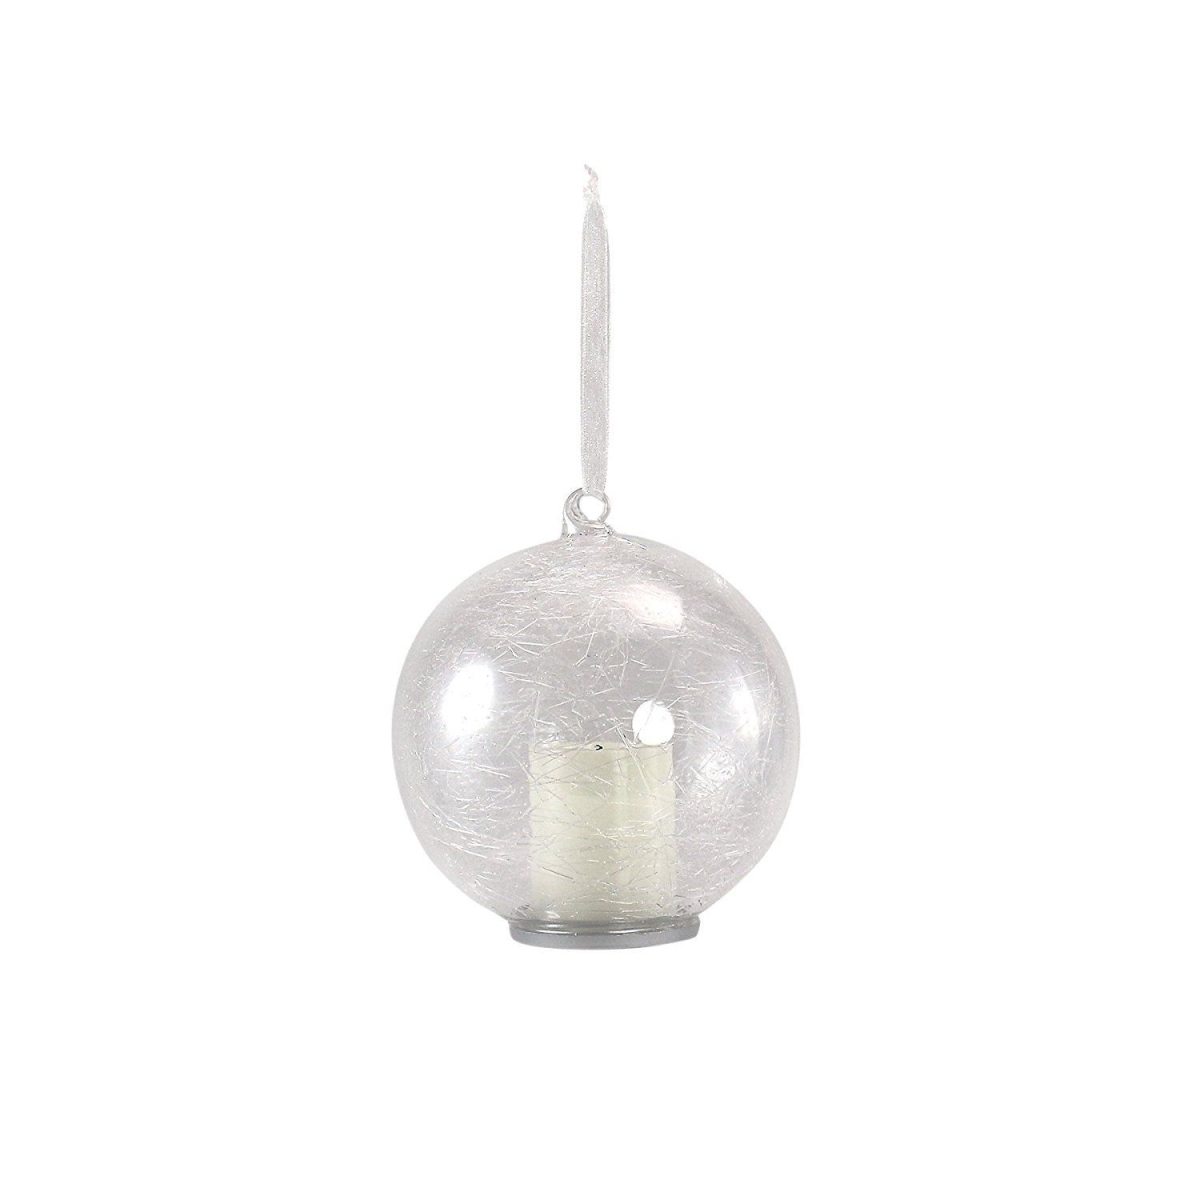 4 In. Dia. Light Up Ornament With Led Candle